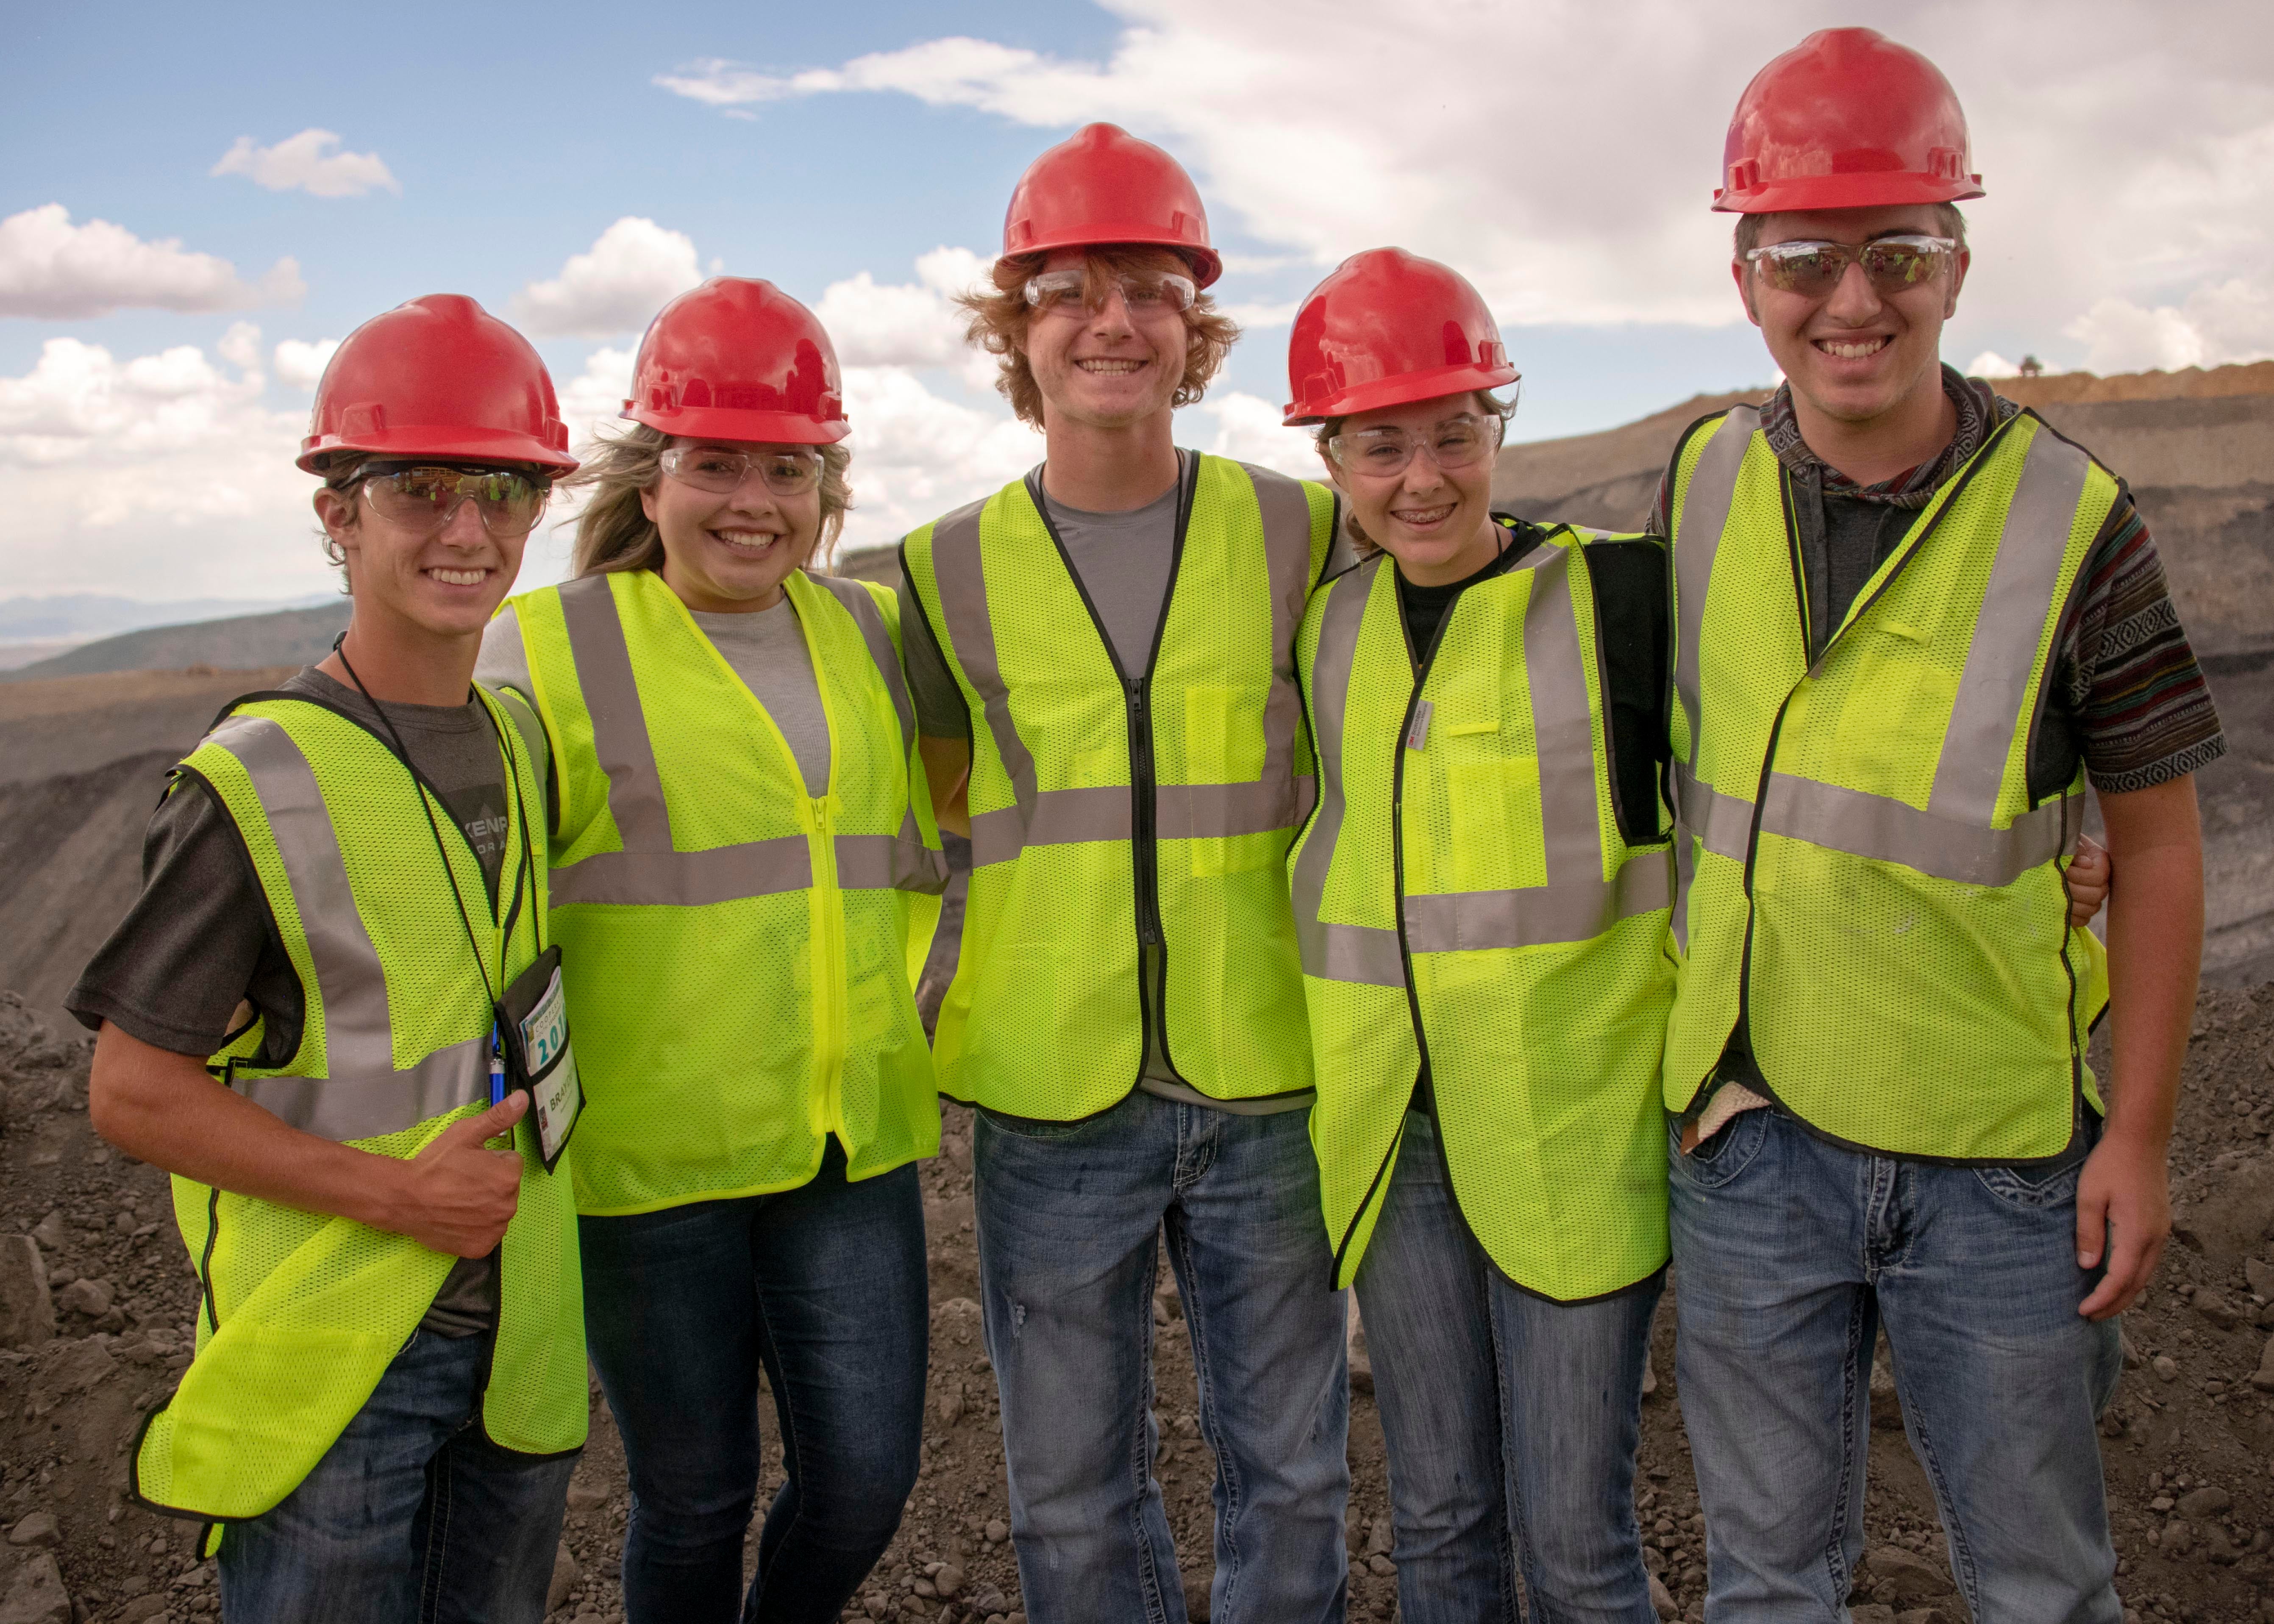 Five campers in hard hats and yellow safety vests pause for a group photo.